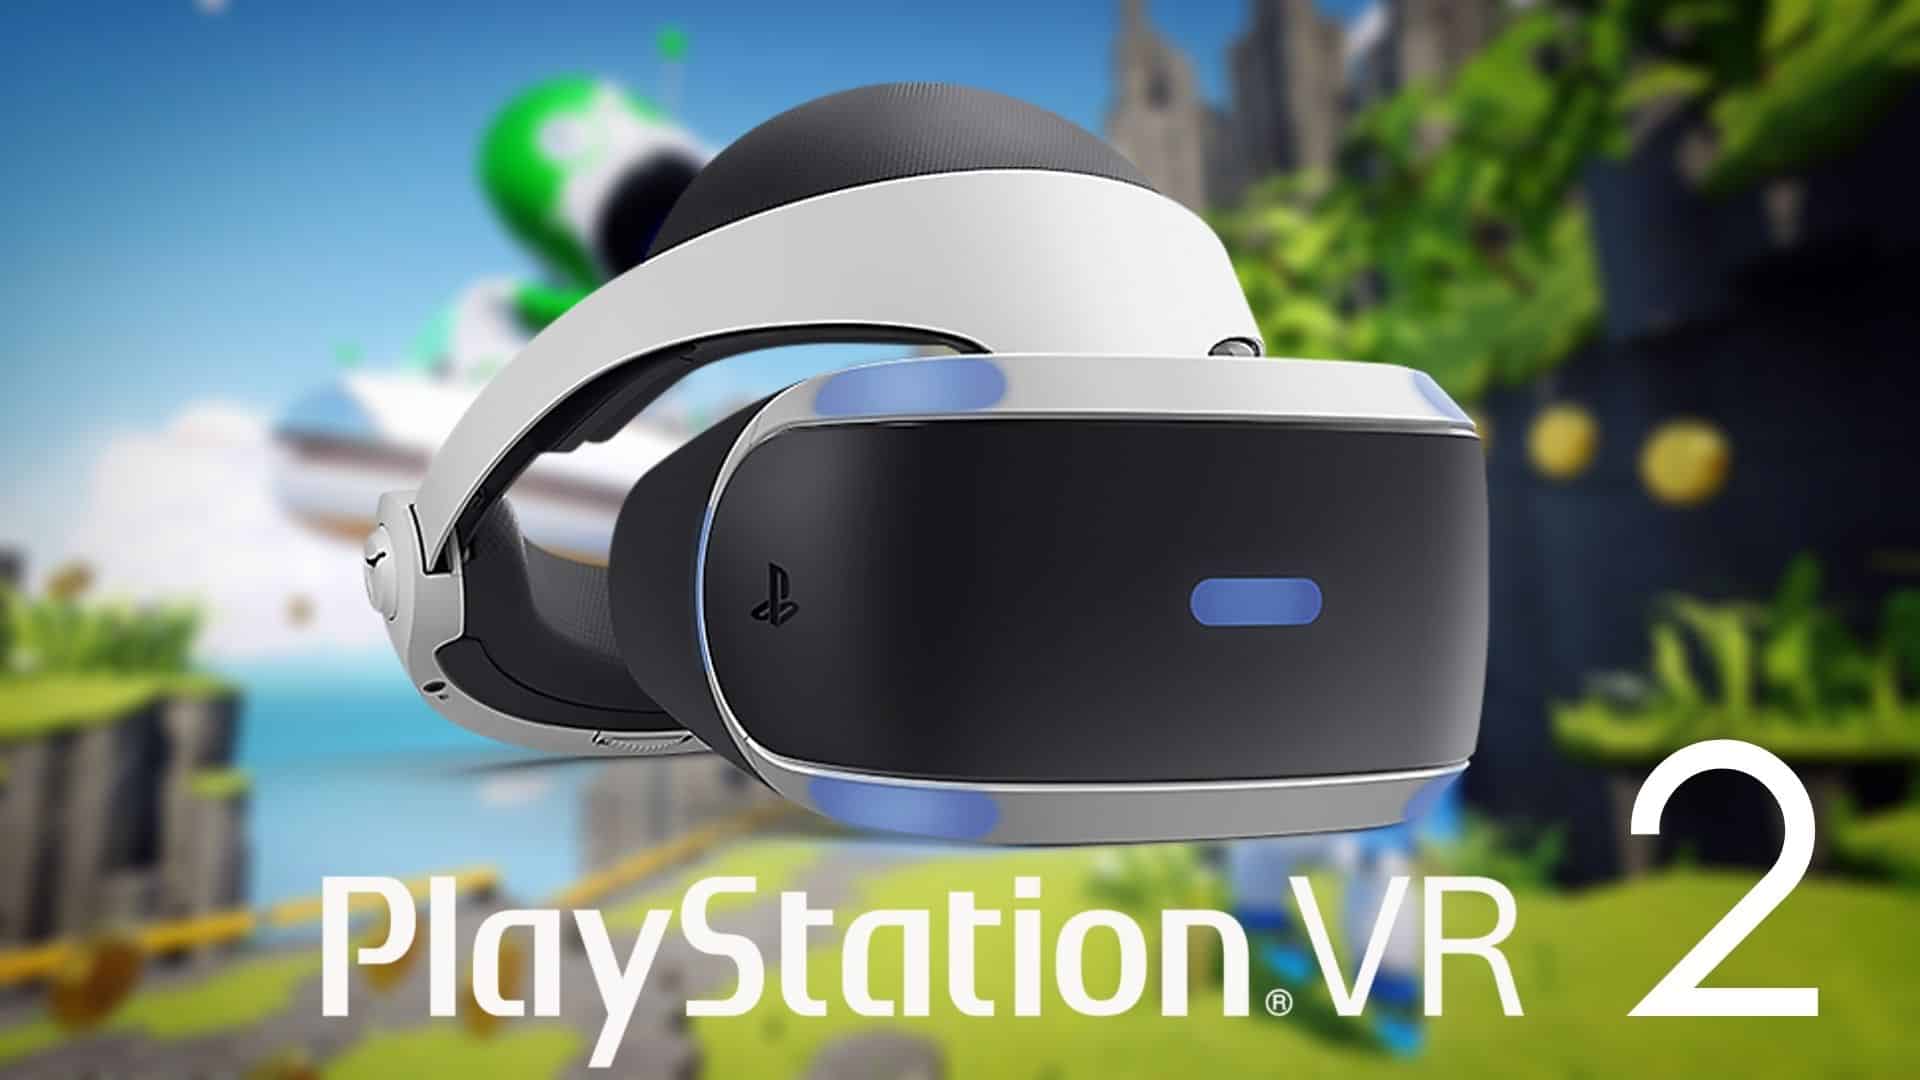 announces next-generation PlayStation VR headset for PS5 - Charlie